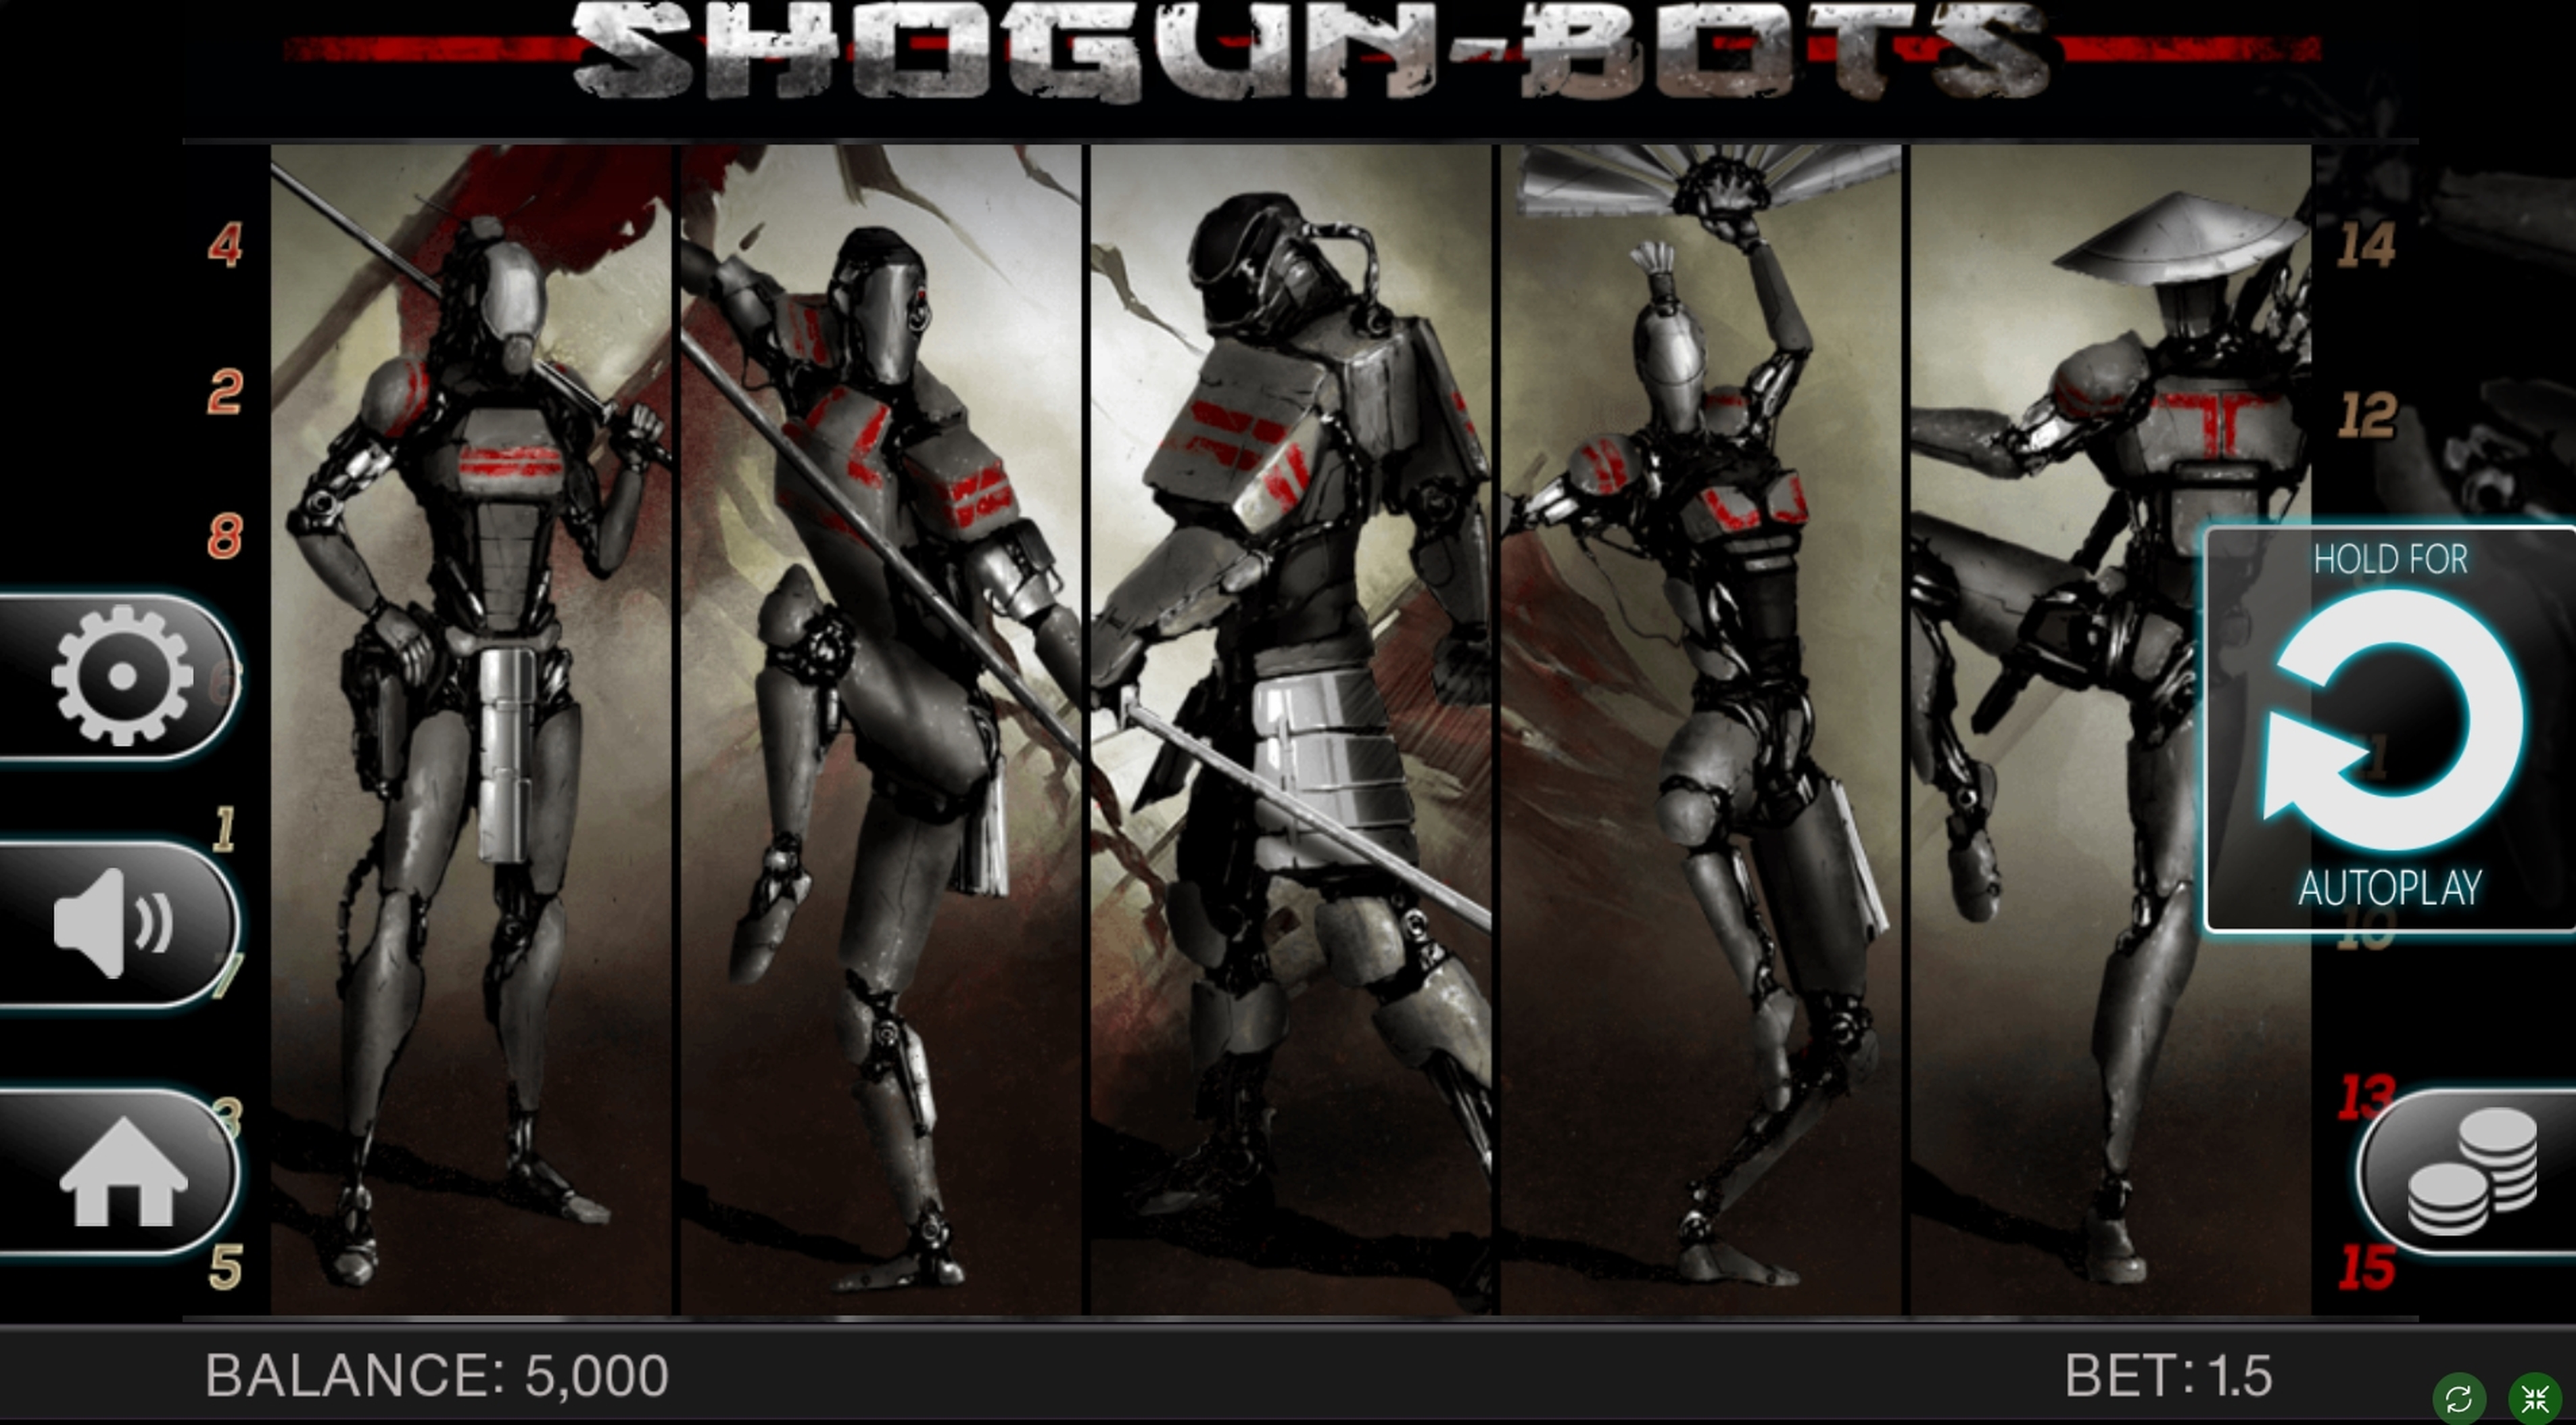 Reels in Shogun bots Slot Game by Spinomenal